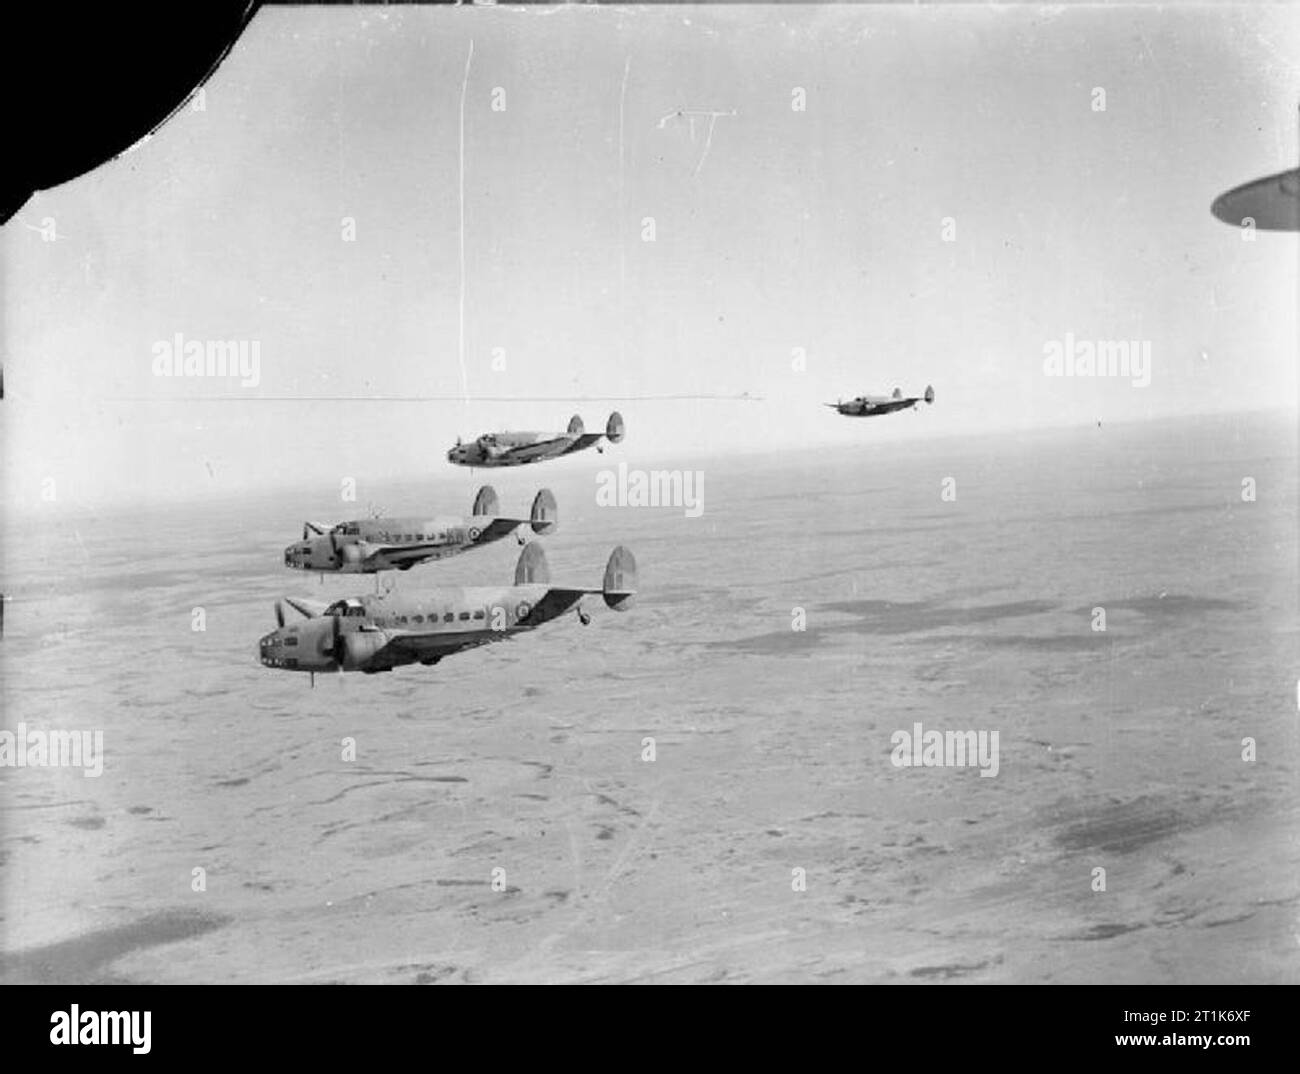 Royal Air Force Operations in the Middle East and North Africa, 1939-1943. Three Lockheed Hudson Mark VI transports, (including FK507 'KW-S', EW889 'KW-E' and EW887 'KW-C'), of No. 267 Squadron RAF based at LG224/Cairo West, Egypt, flying troops to Castel Benito, Tripoli, on an Operation HELPFUL flight. Stock Photo